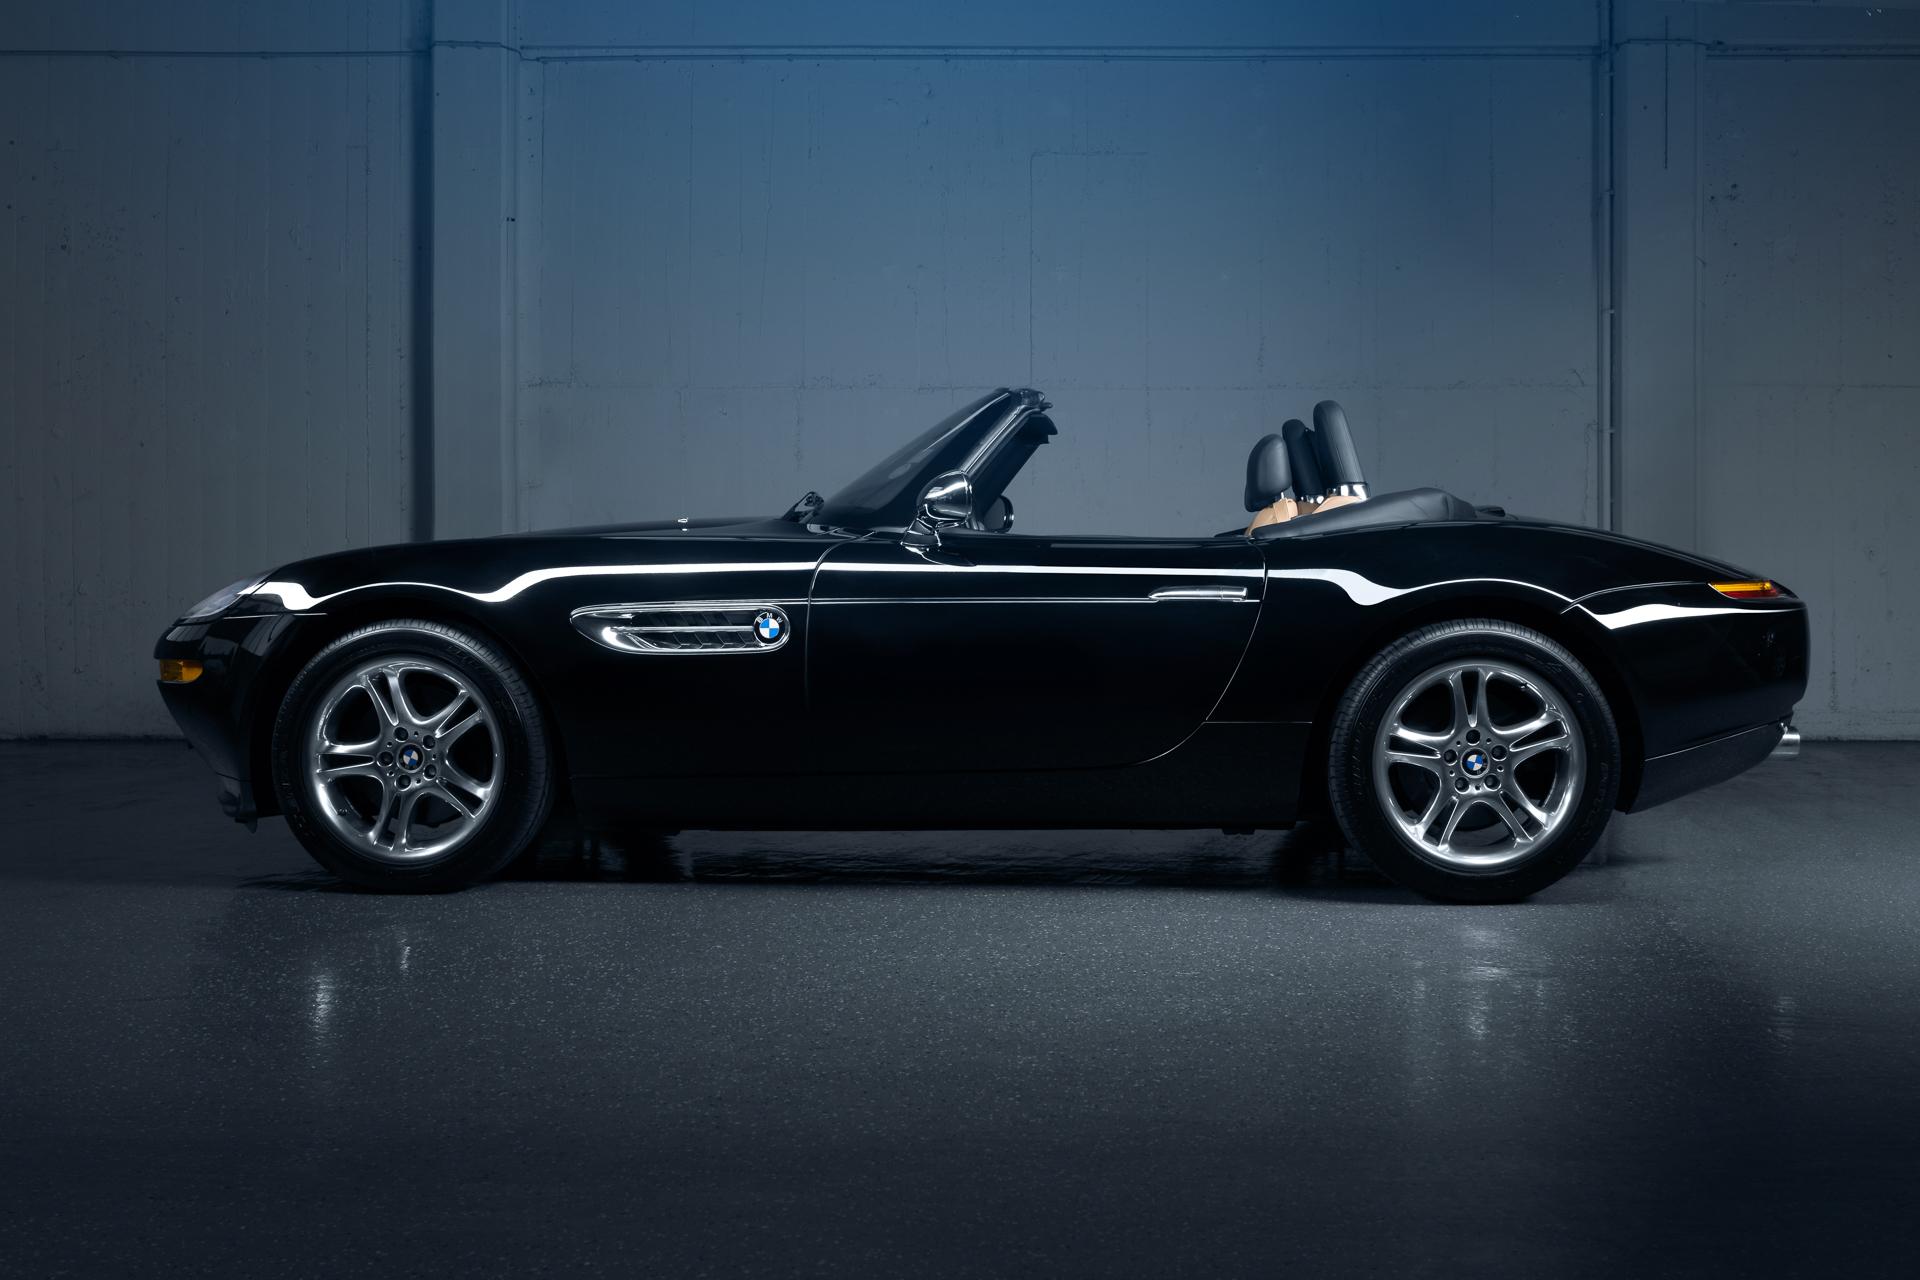 haar regering half acht BMW on Twitter: "When young @empehde saw a #BMW #Z8 a dream was born. A  decade later he found himself w/ the #V8 roadster #BMWstories  http://t.co/K5BiAwPLMQ" / Twitter